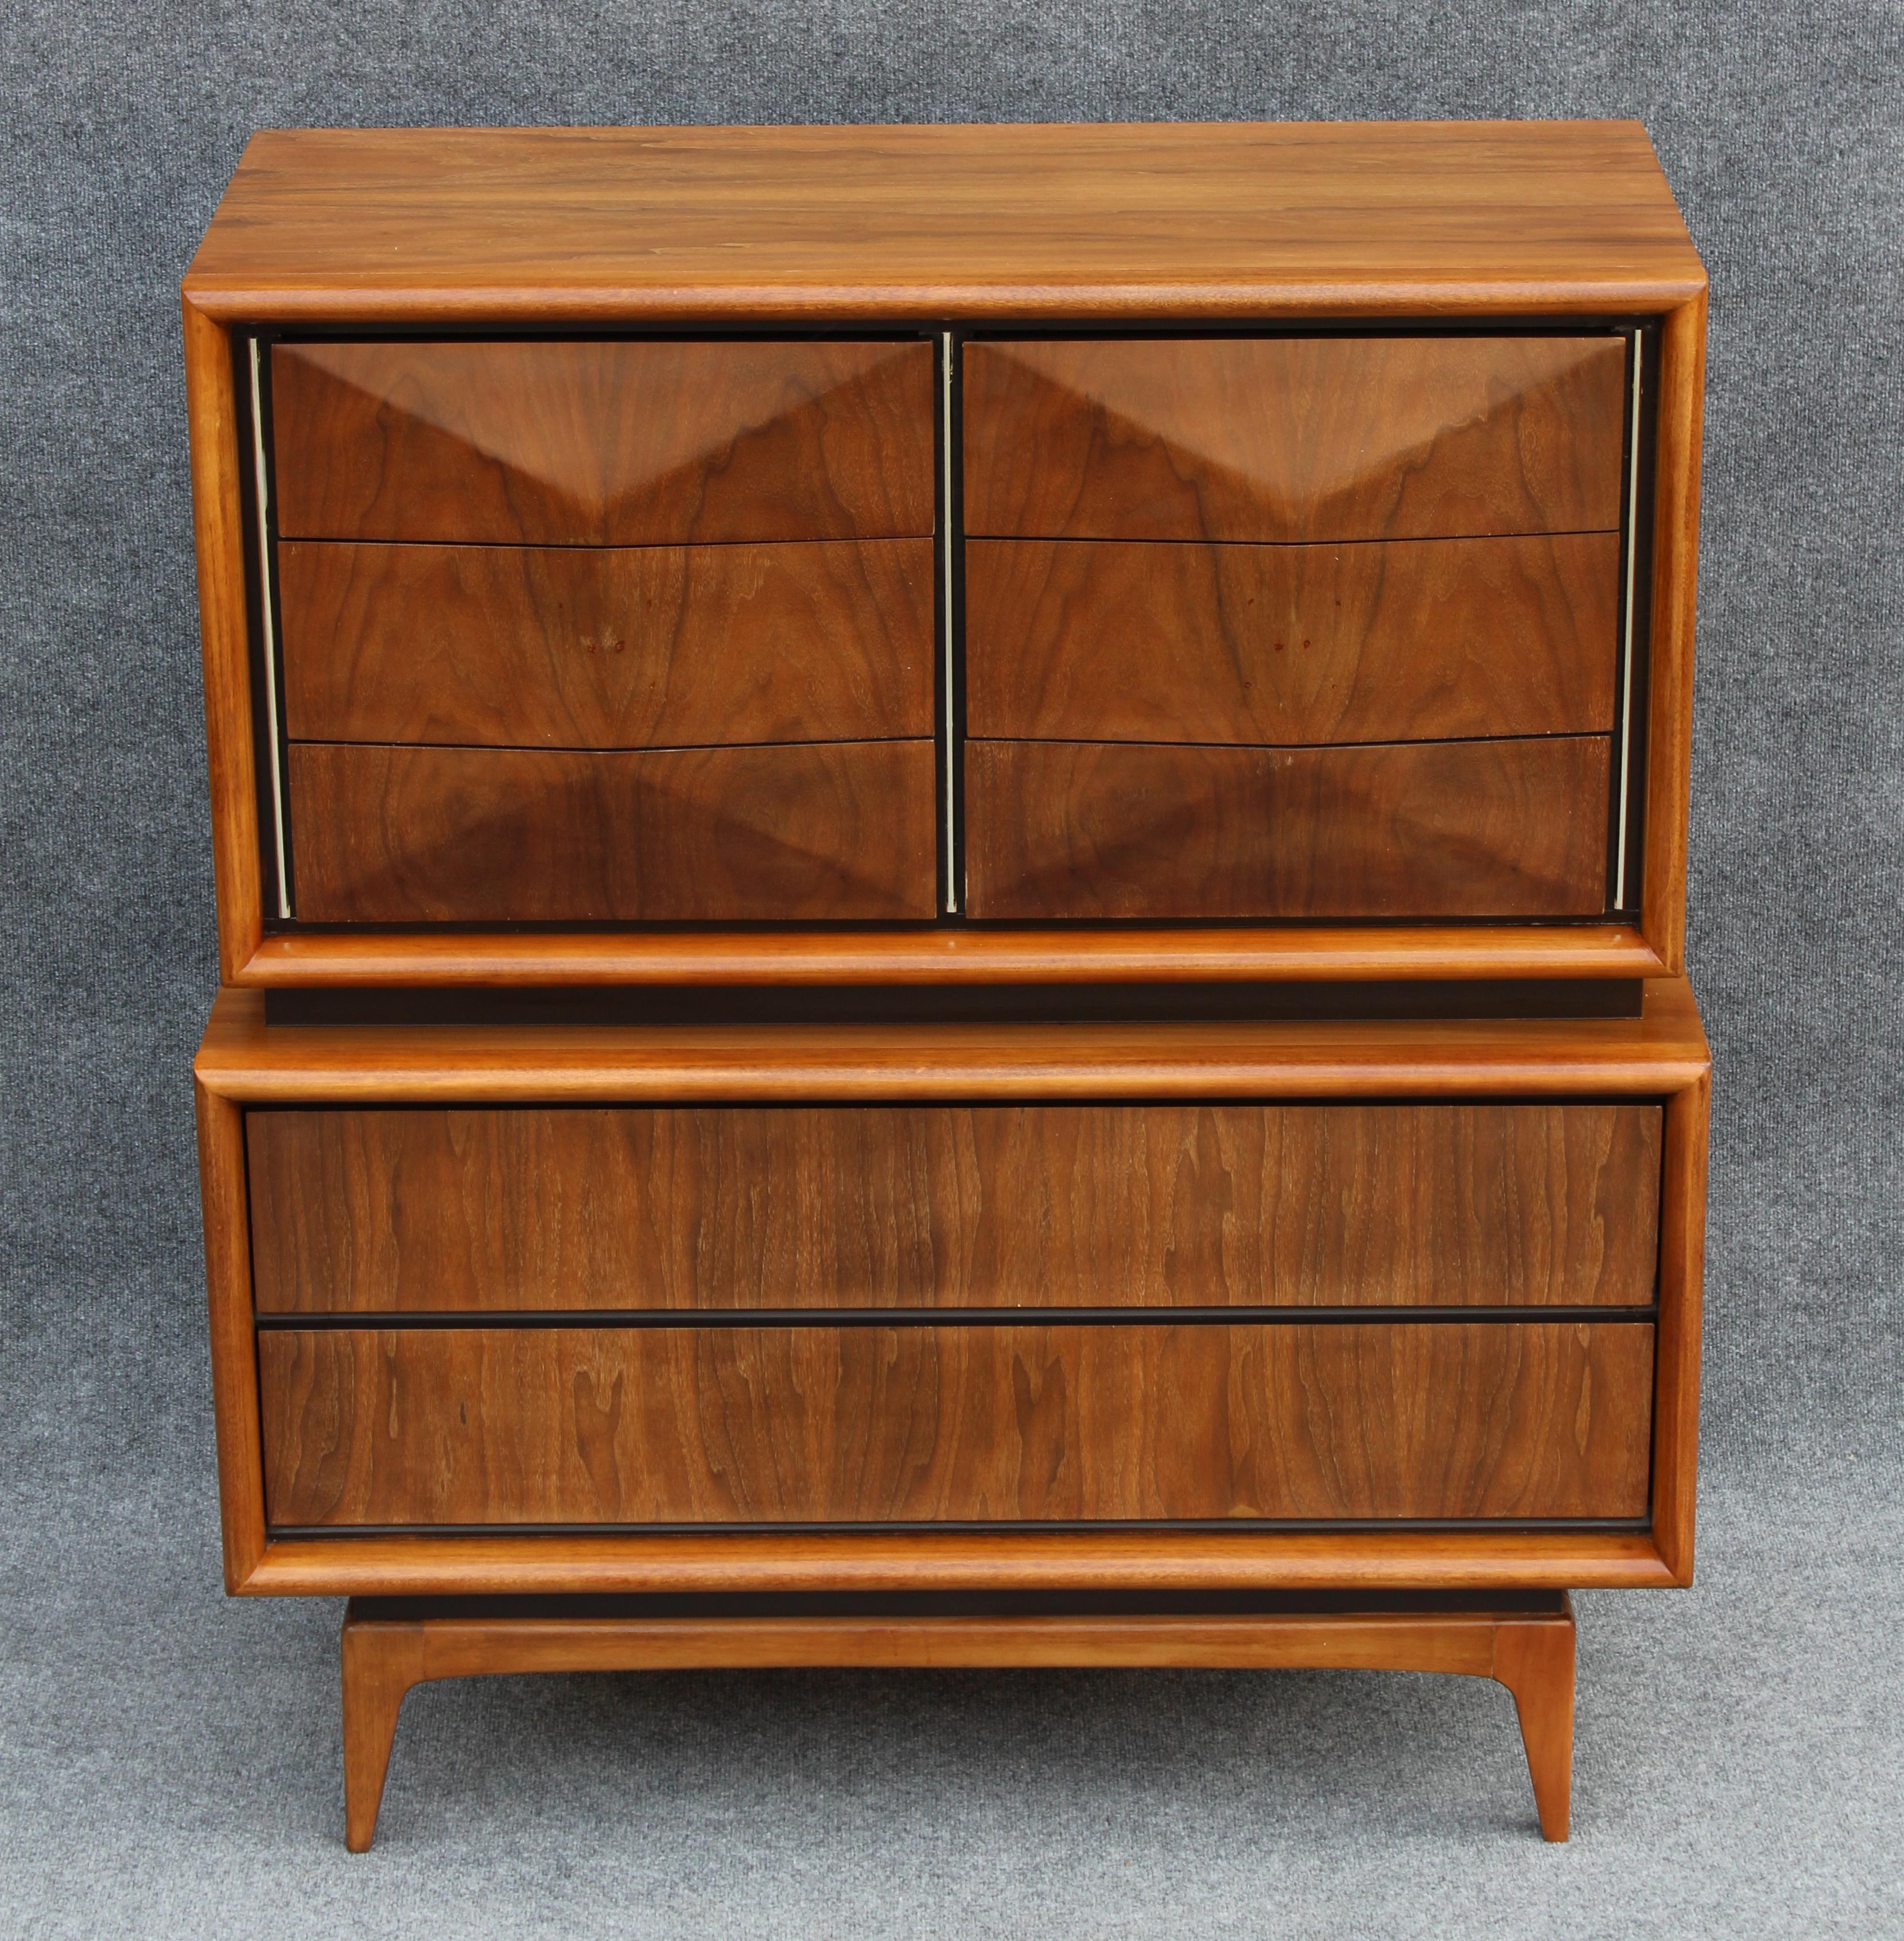 Mid-Century Modern United Furniture Company vintage circa 1950s tall dresser. A fine example of American retro furniture design. Solid construction with no particle board. Walnut wood veneer over solid wood. The drawers all feature .5